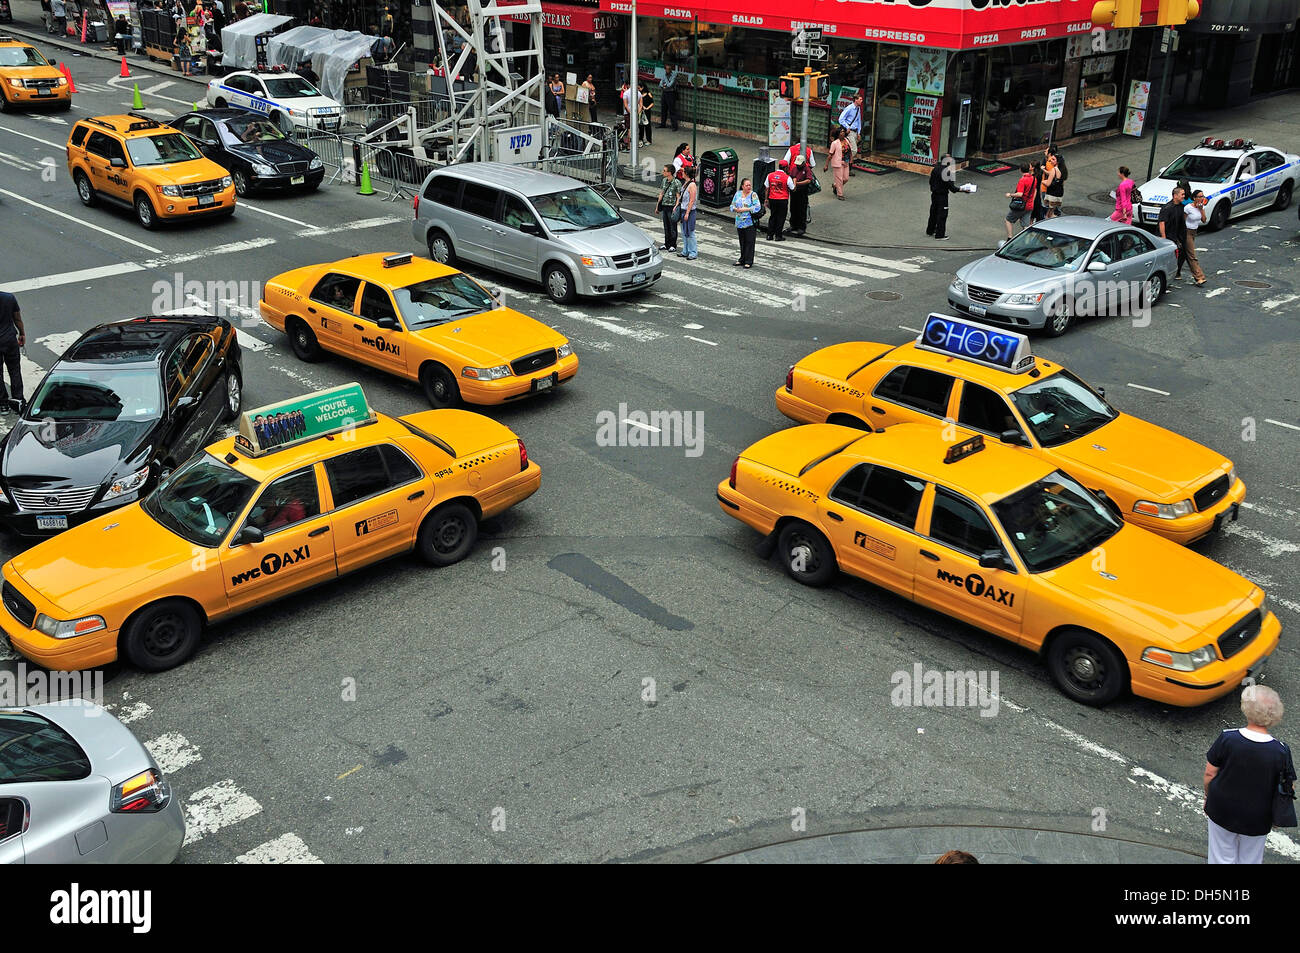 Rush hour, taxis in Times Square, Midtown, Manhattan, New York, USA, North America, PublicGround Stock Photo